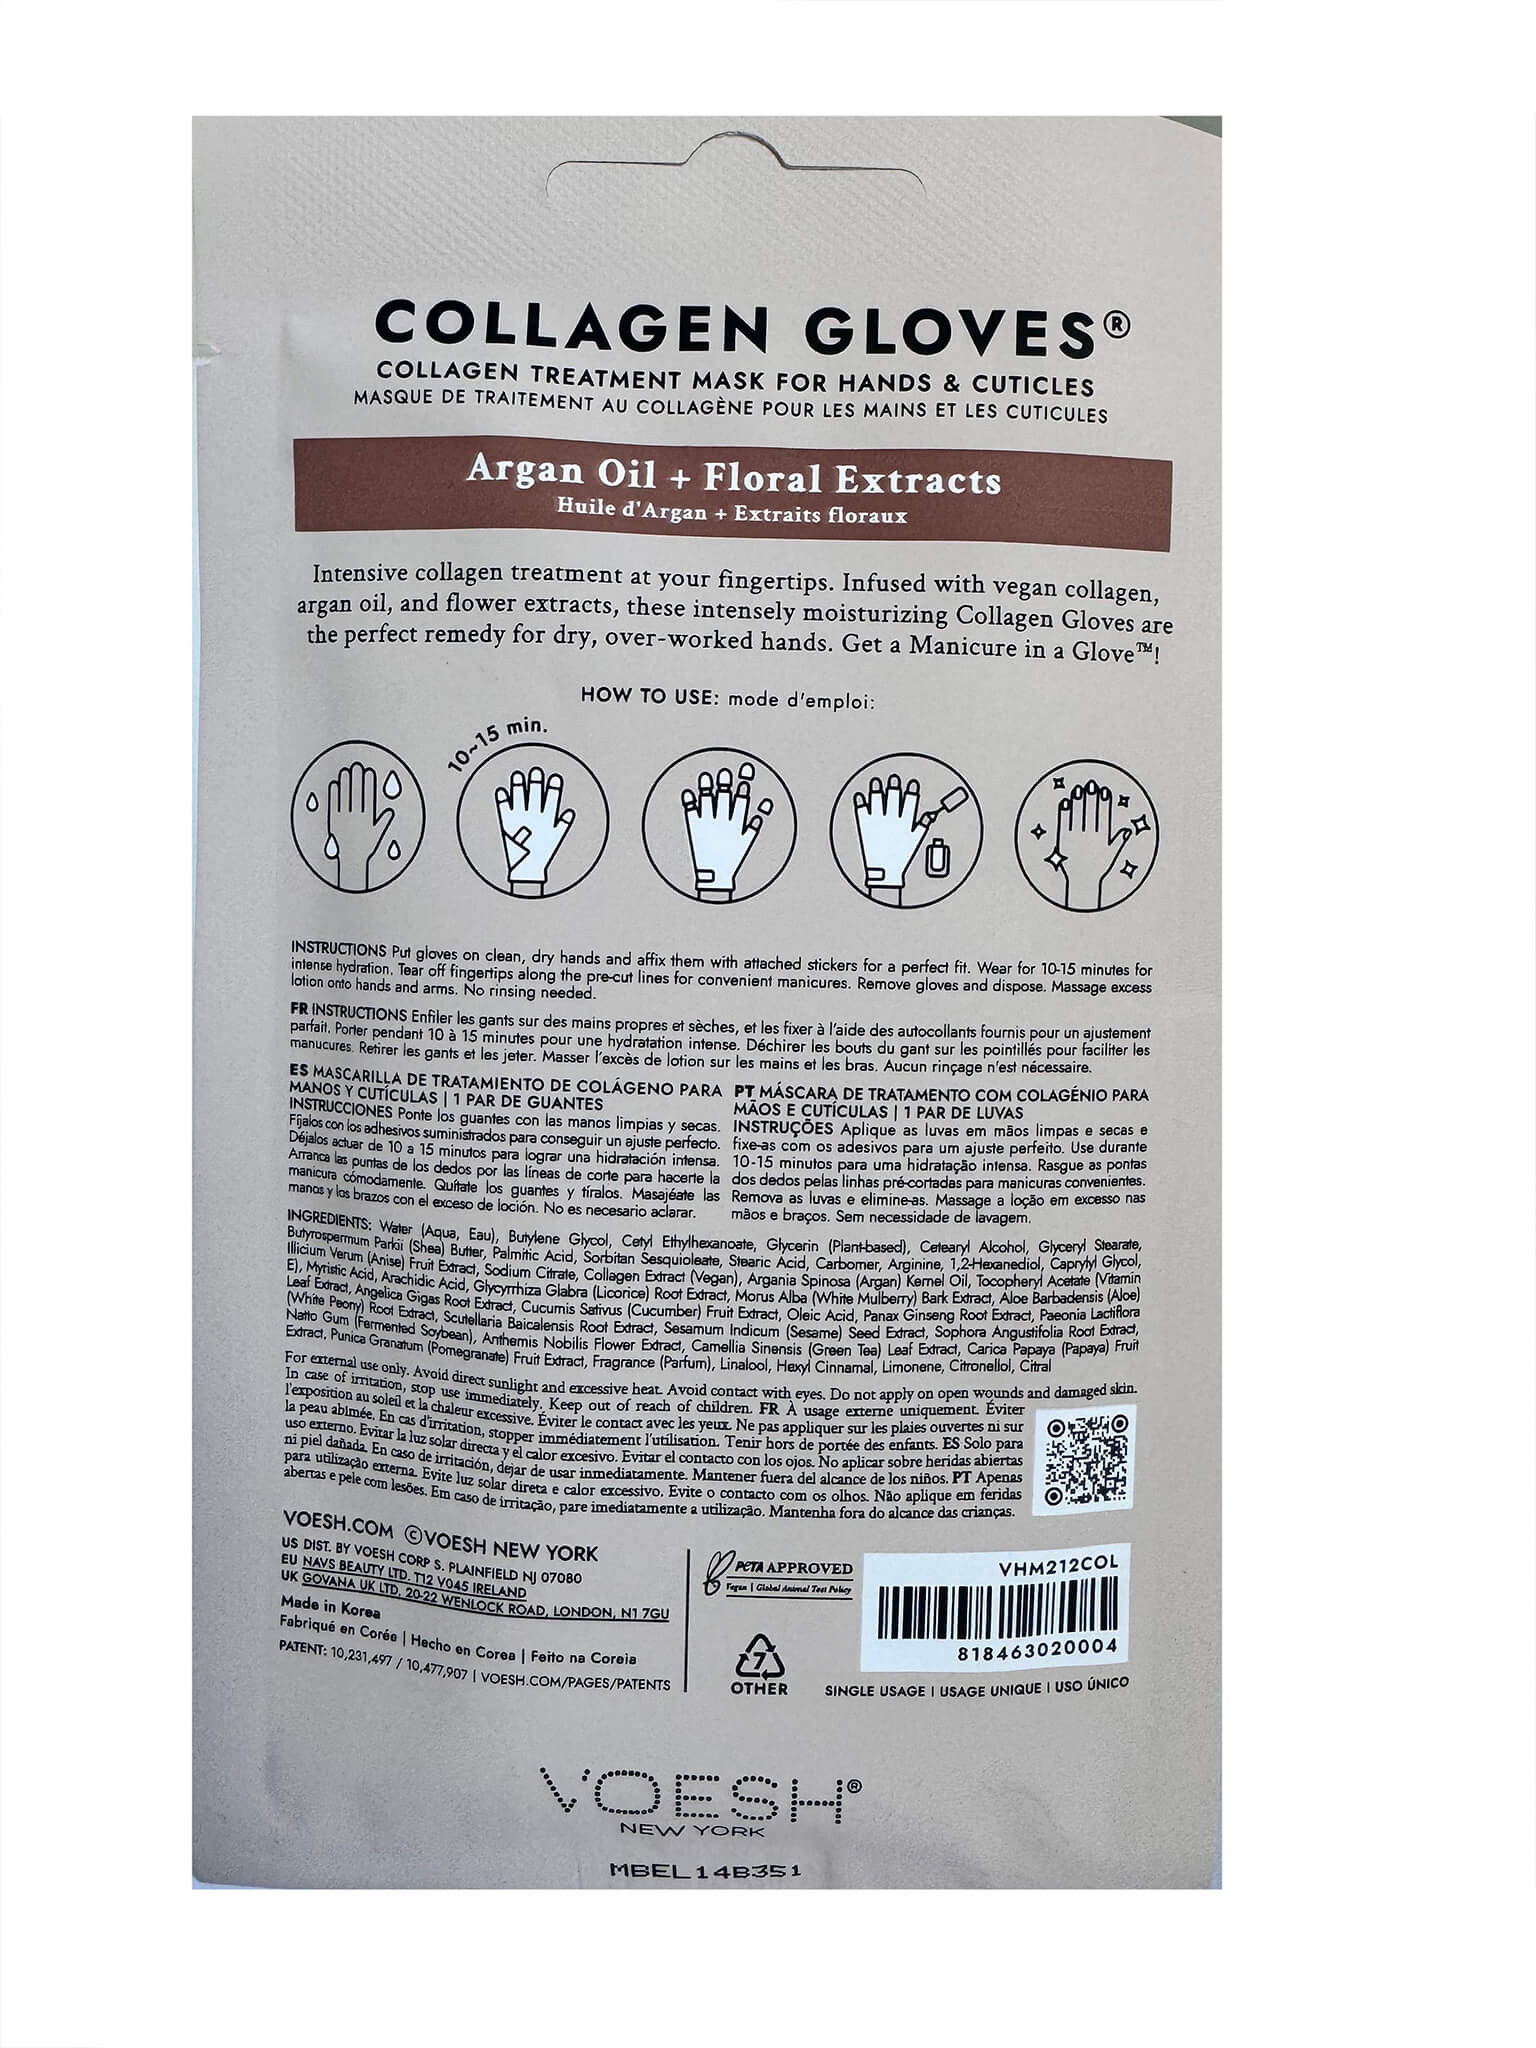 VOESH Collagen Gloves - With Argan Oil + Floral Extracts